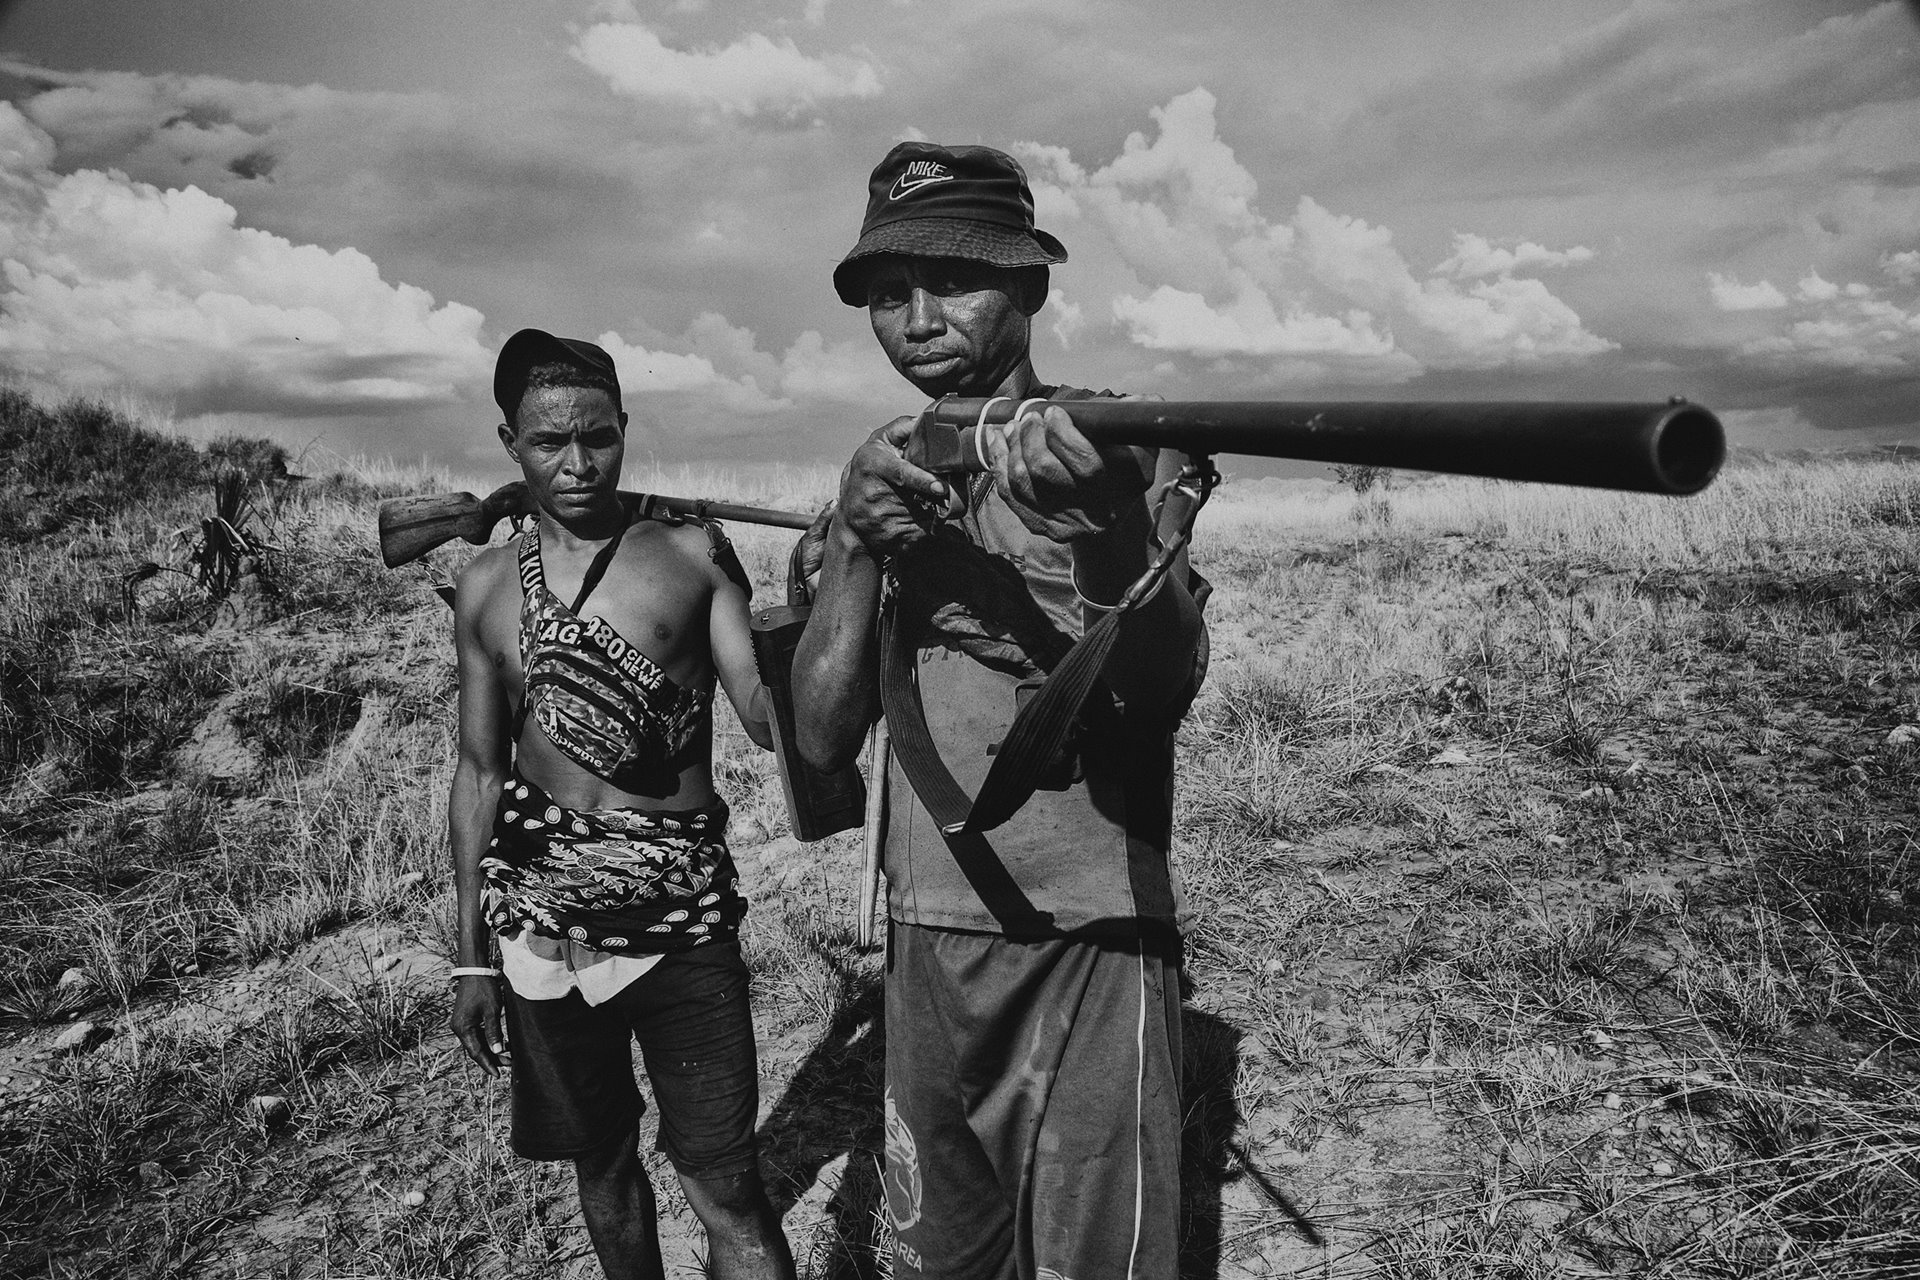 Lemana (left) and Lemena (right) pose with their guns. They live in the village of Marotahalaky, in Menabe, Madagascar. The village is the base of Mahasoaky, the man said by military authorities in the region to be the mastermind of numerous large zebu theft operations.